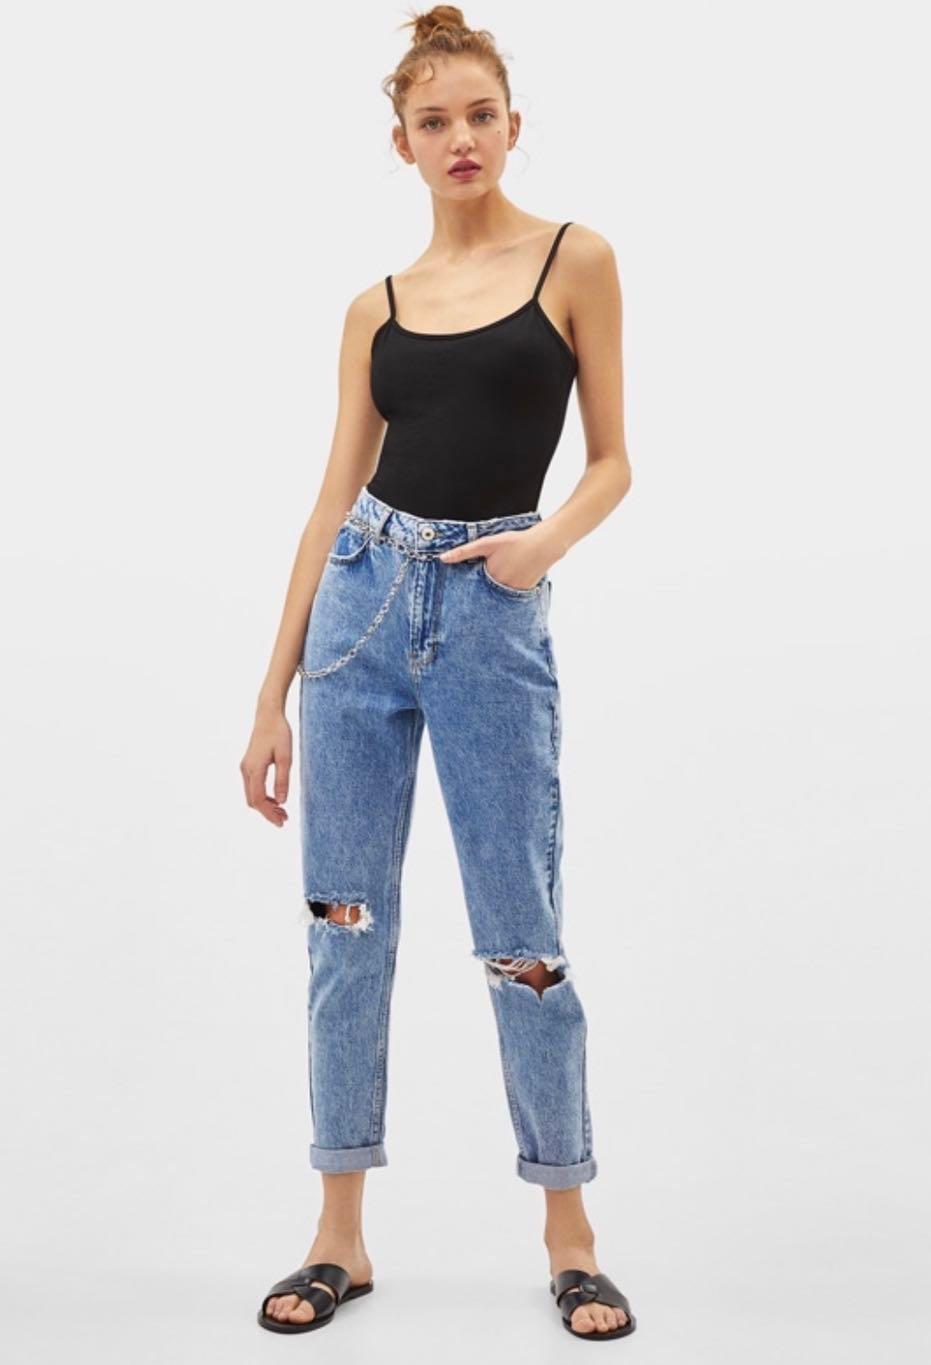 Bershka High Waist Mom Jeans With Chain Women S Fashion Clothes Pants Jeans Shorts On Carousell